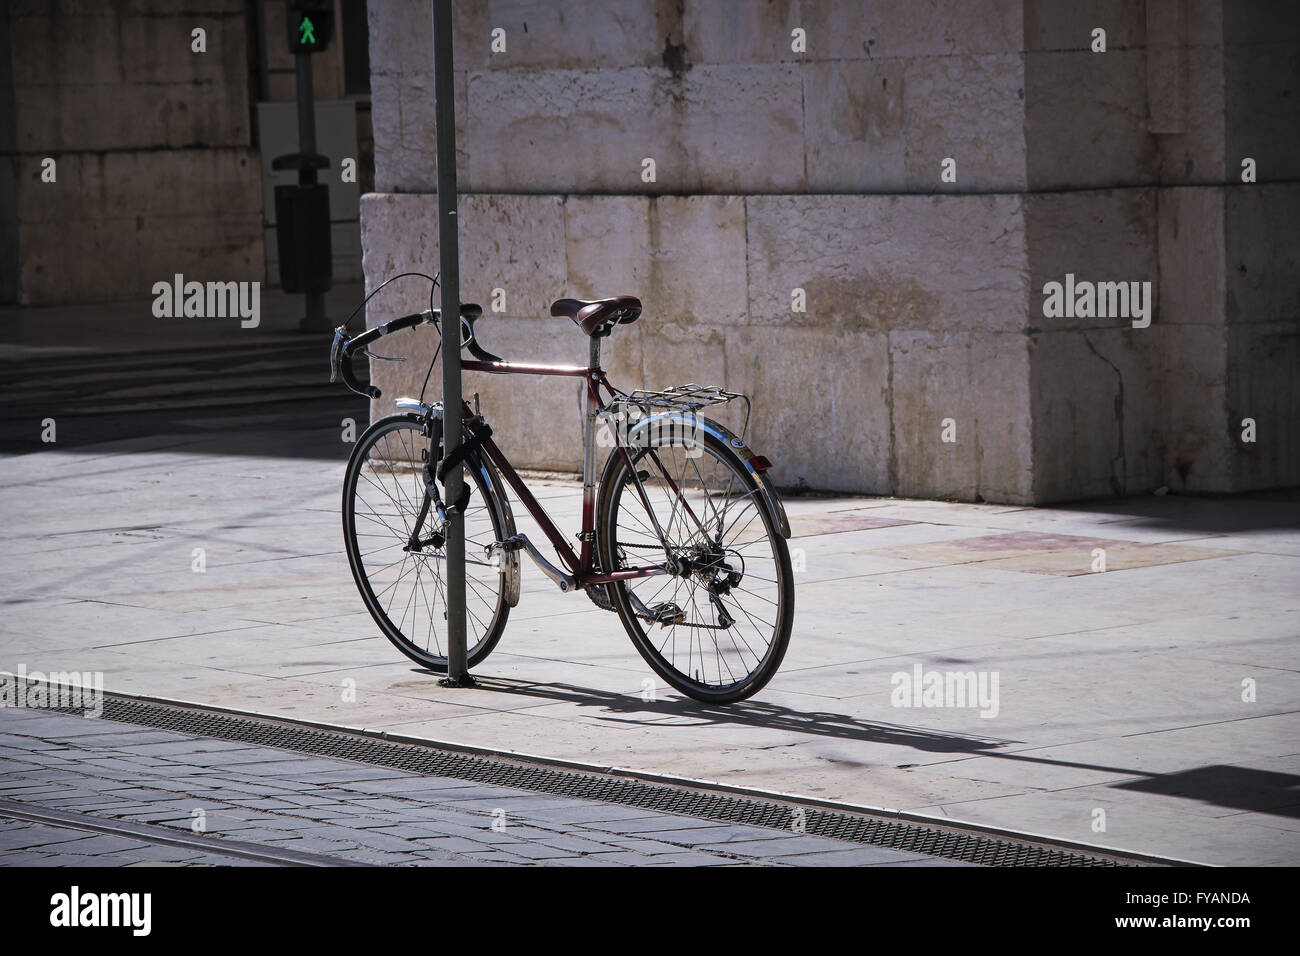 Bike affixed to a metal post in lisbon. Stock Photo